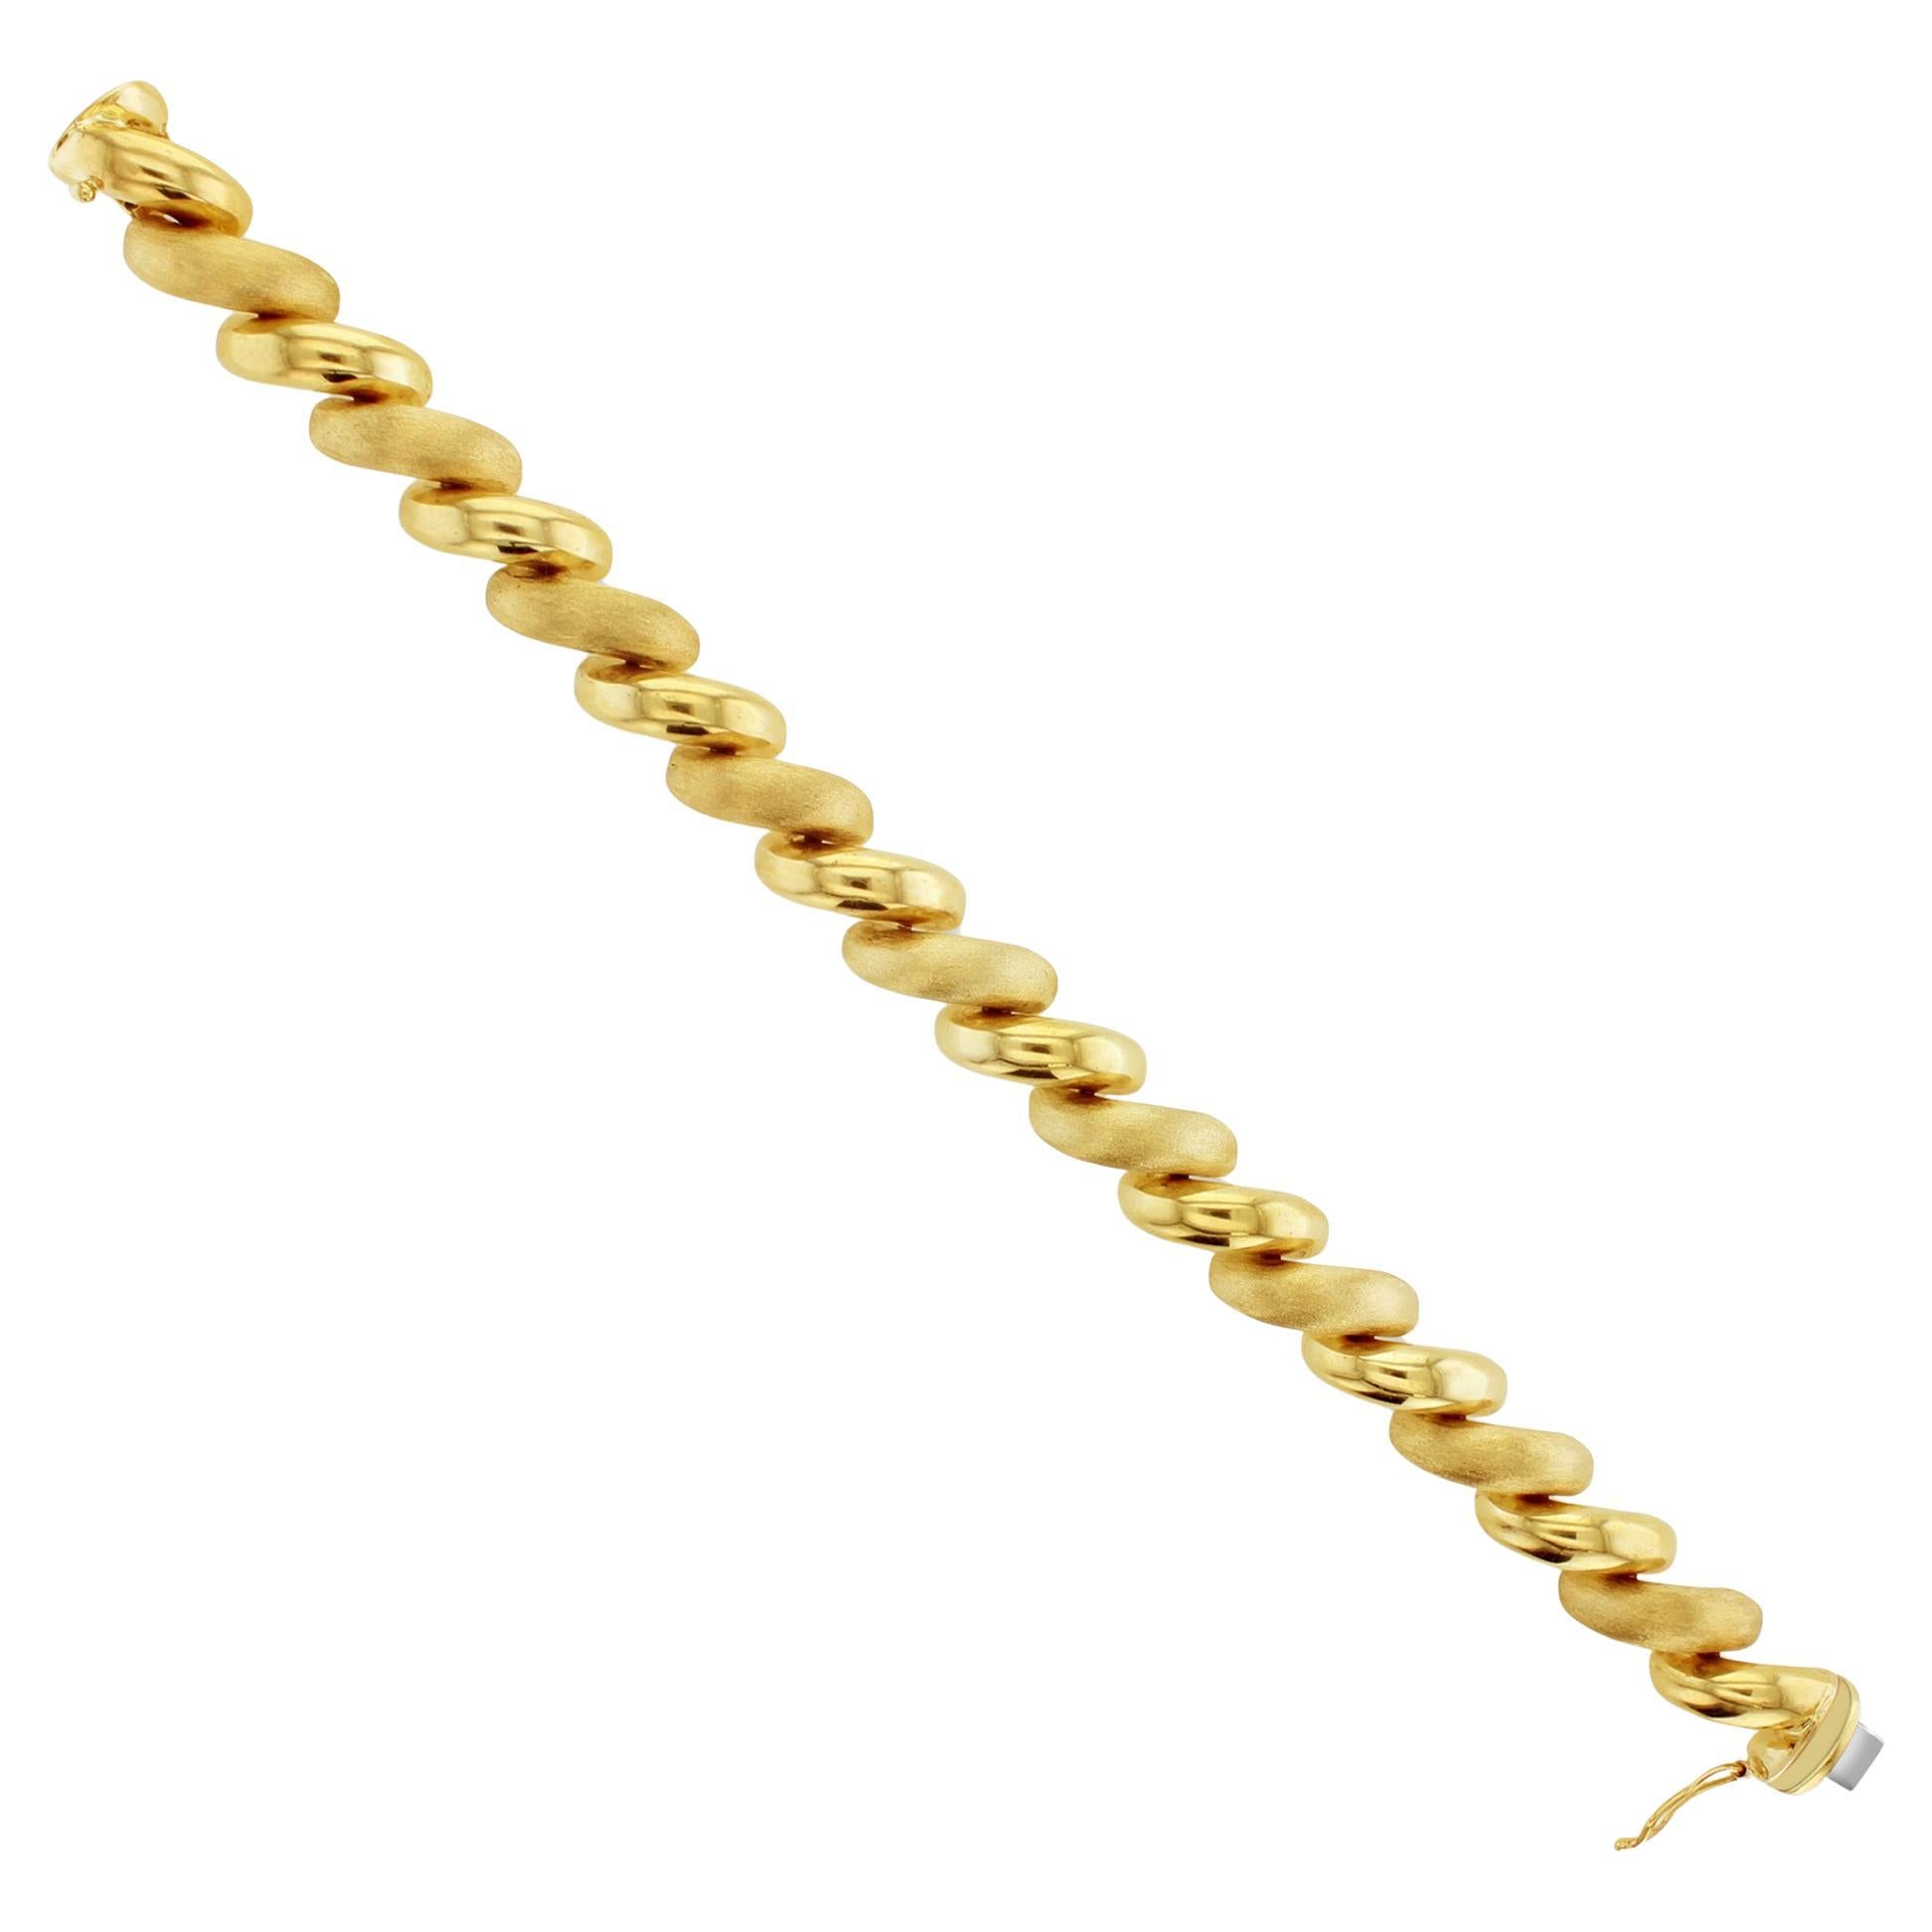 San Marco Gold Link Chain Bracelet with Mixed Finish 14k Yellow Gold